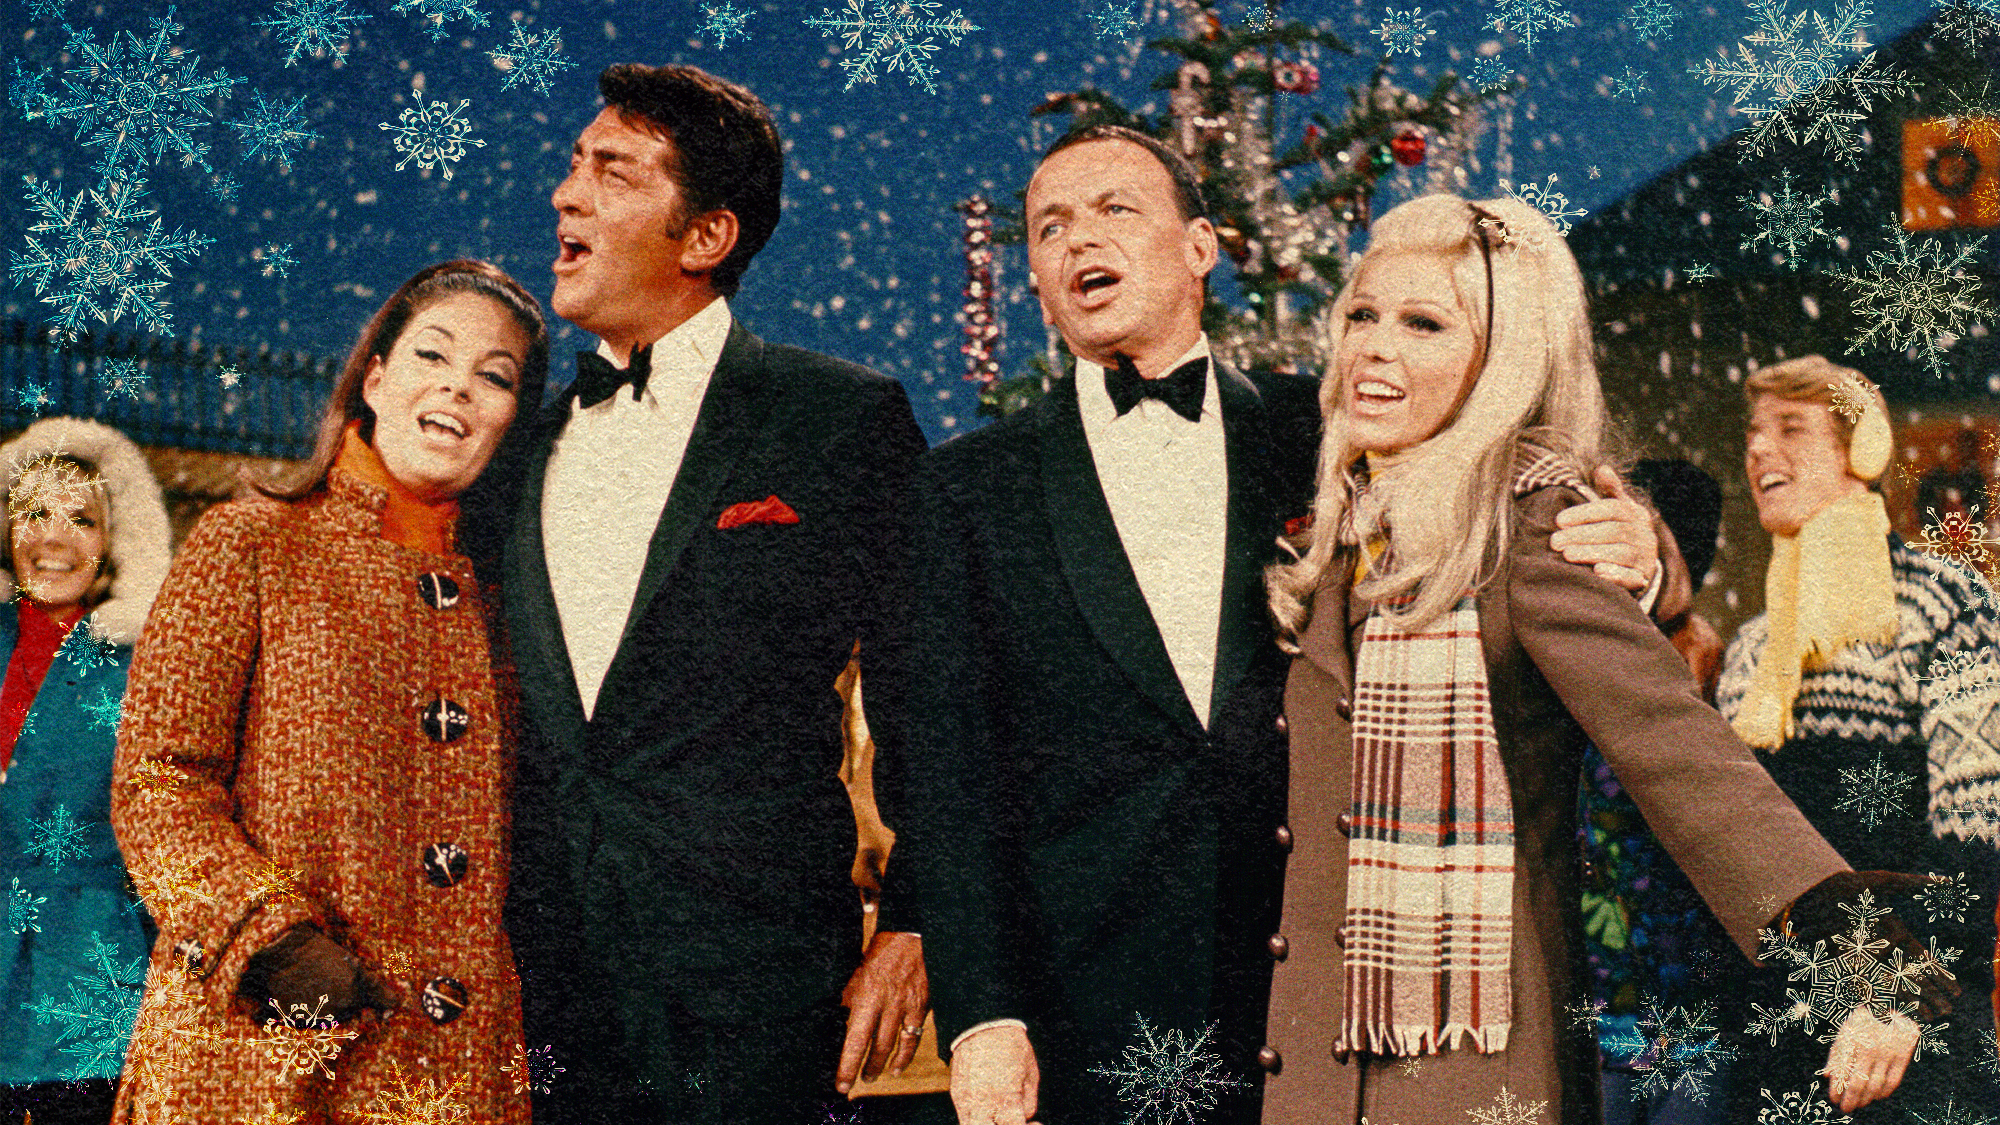 5 To Watch: Vintage Christmas specials for an old-fashioned holiday